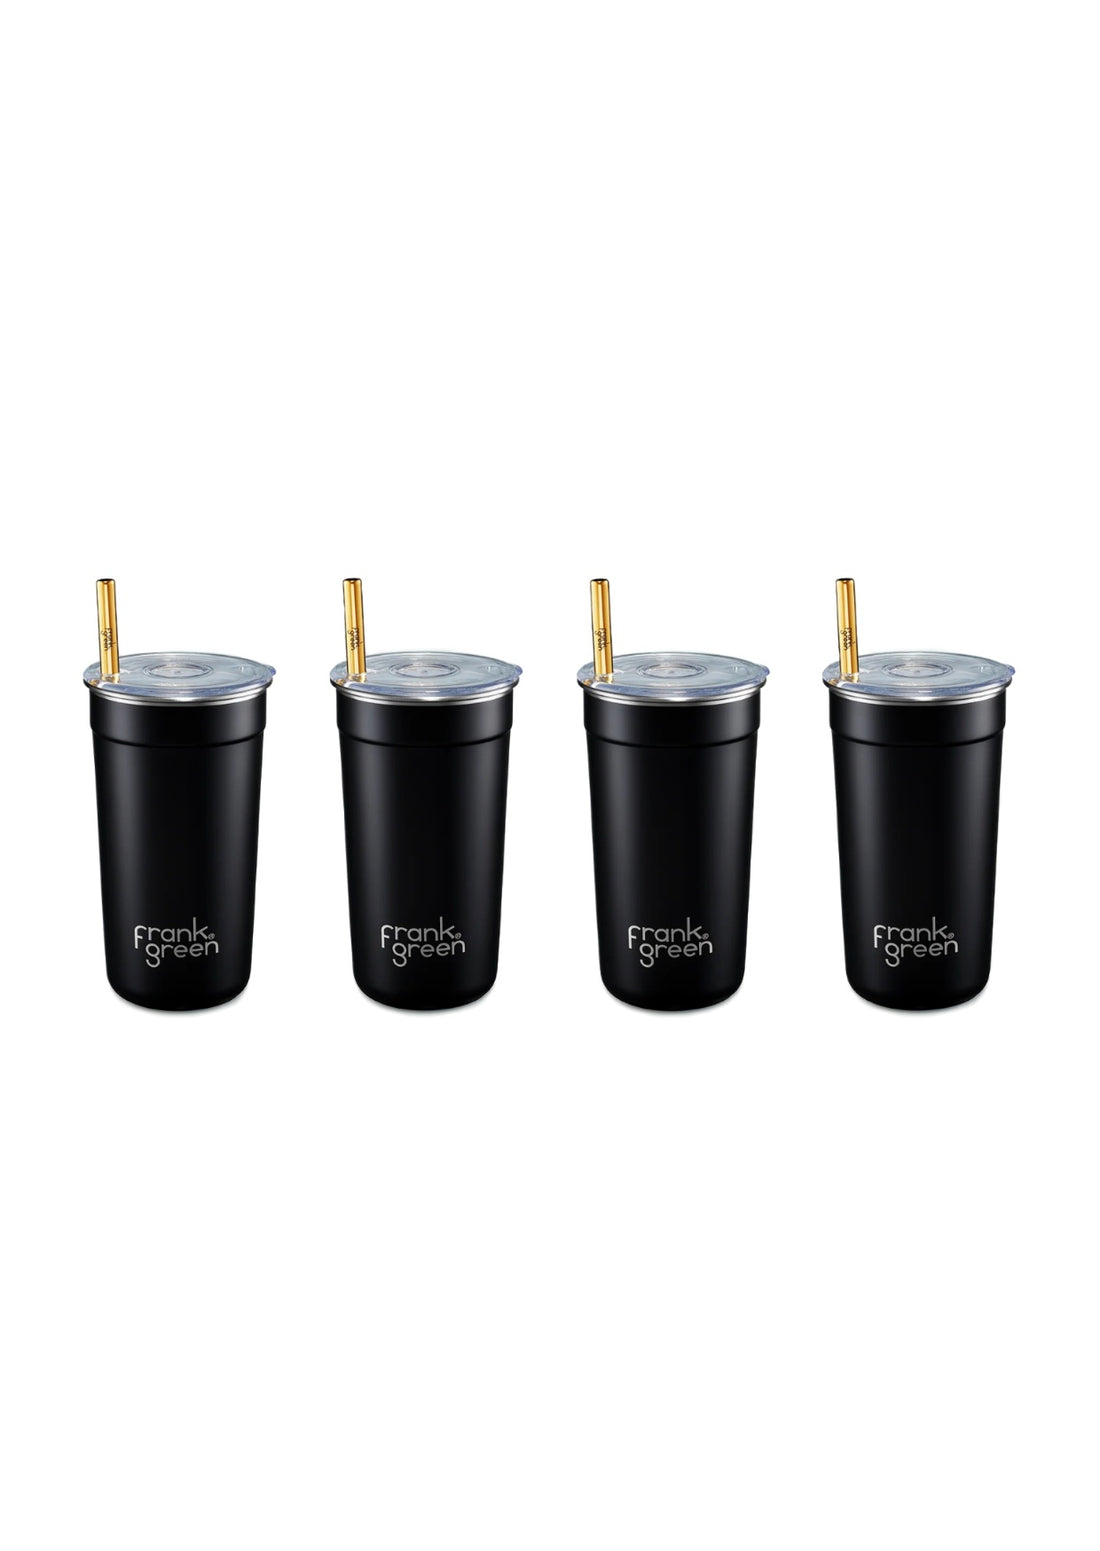 Frank Green Reusable Party Cups 16oz/475 ml (4 pack) - Midnight